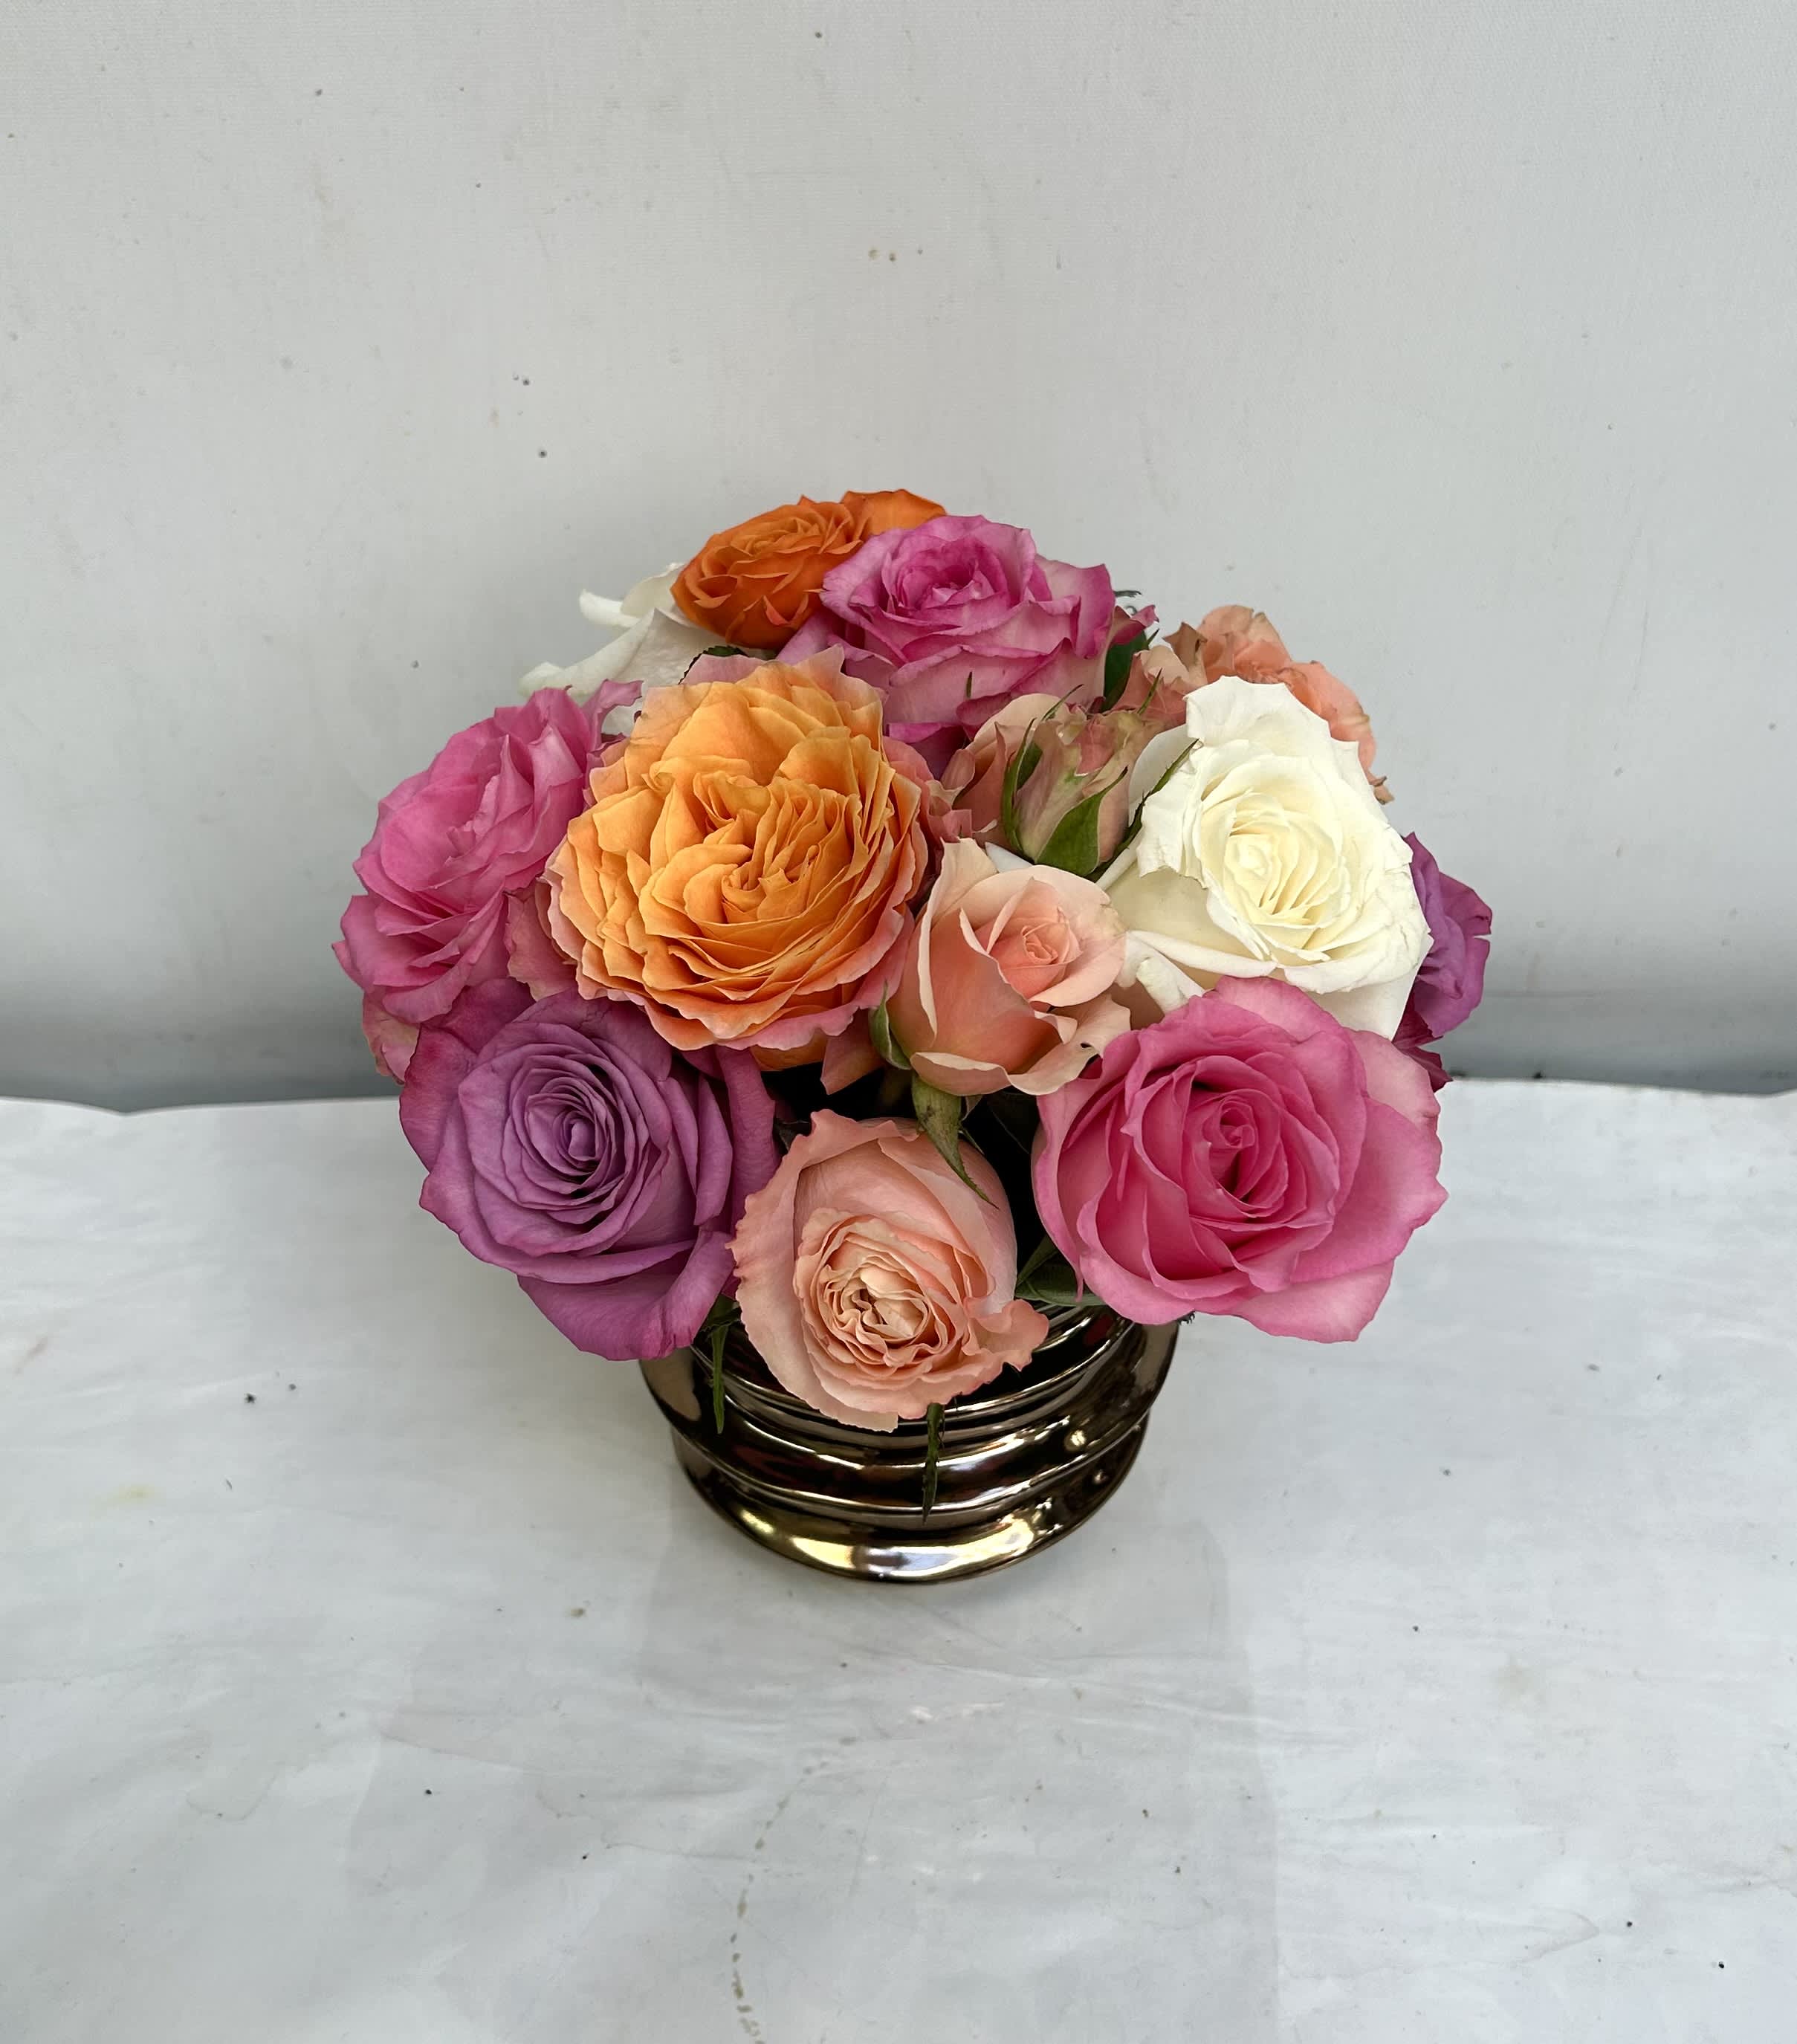 Sorbet  - A colorful mix of roses in a gold keepsake compote!